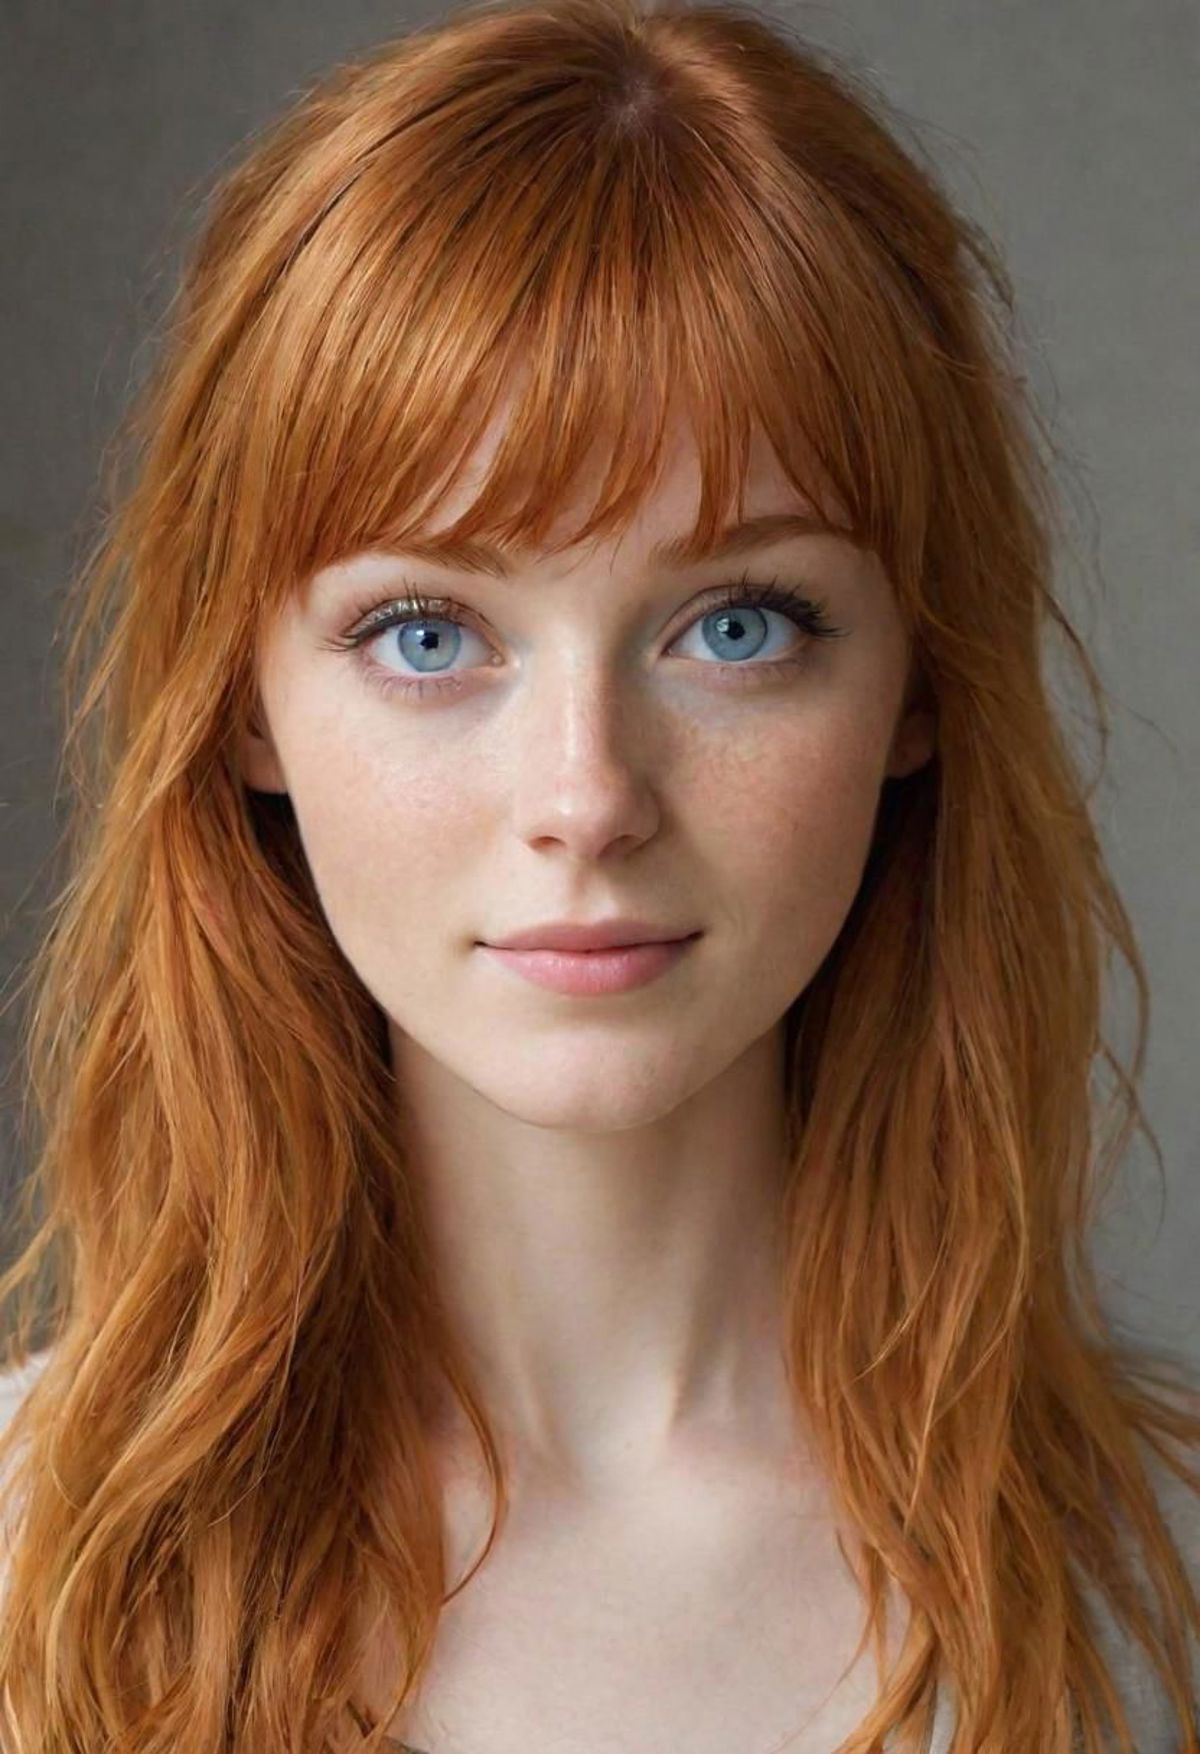 A red-haired woman with blue eyes and a smile.